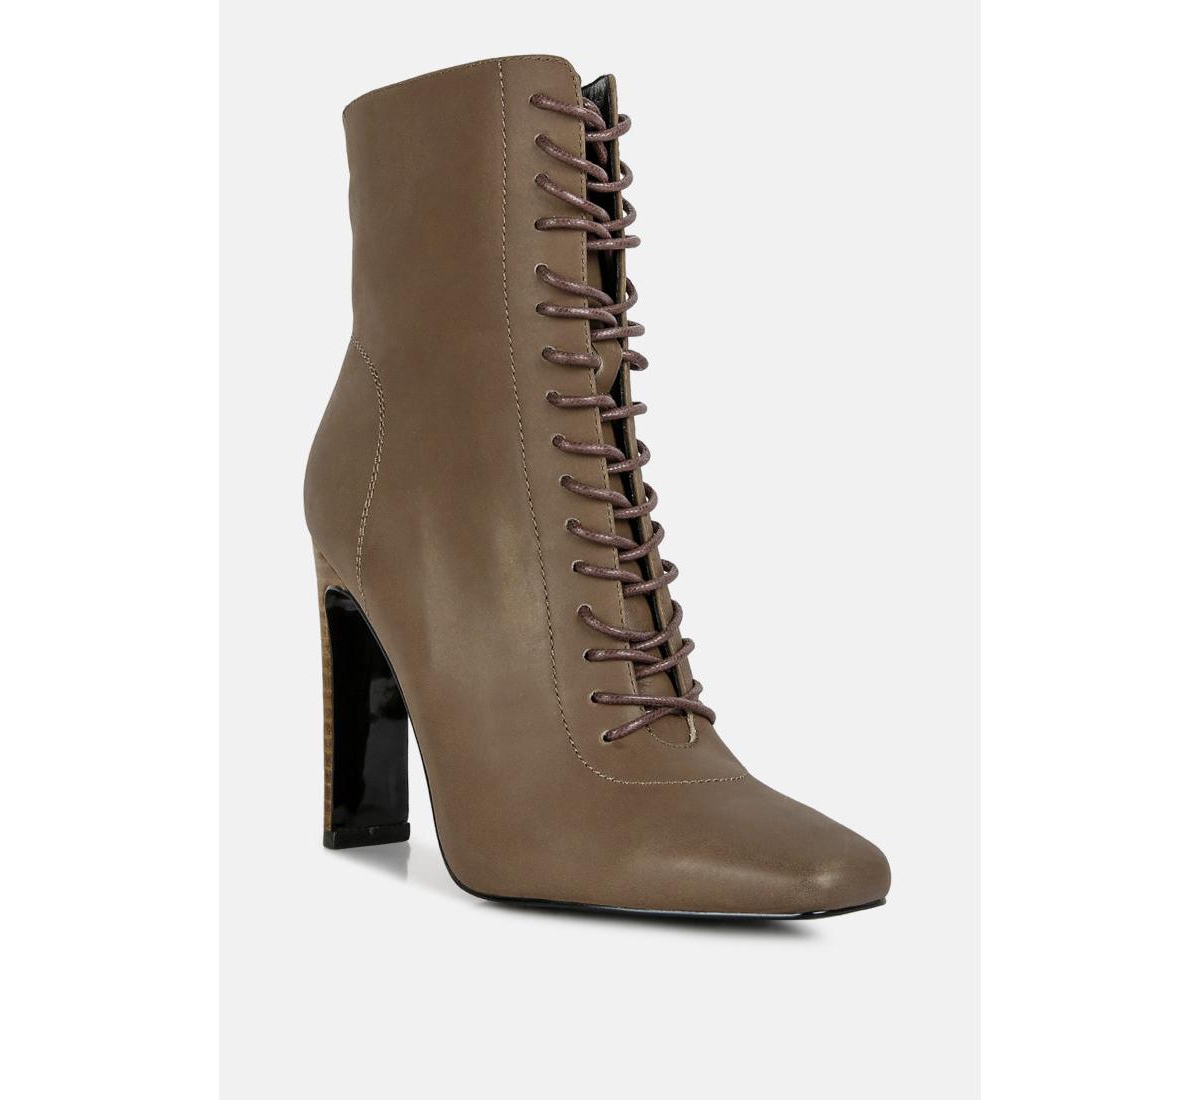 RAG & CO WYNDHAM WOMEN'S LACE UP LEATHER ANKLE BOOTS